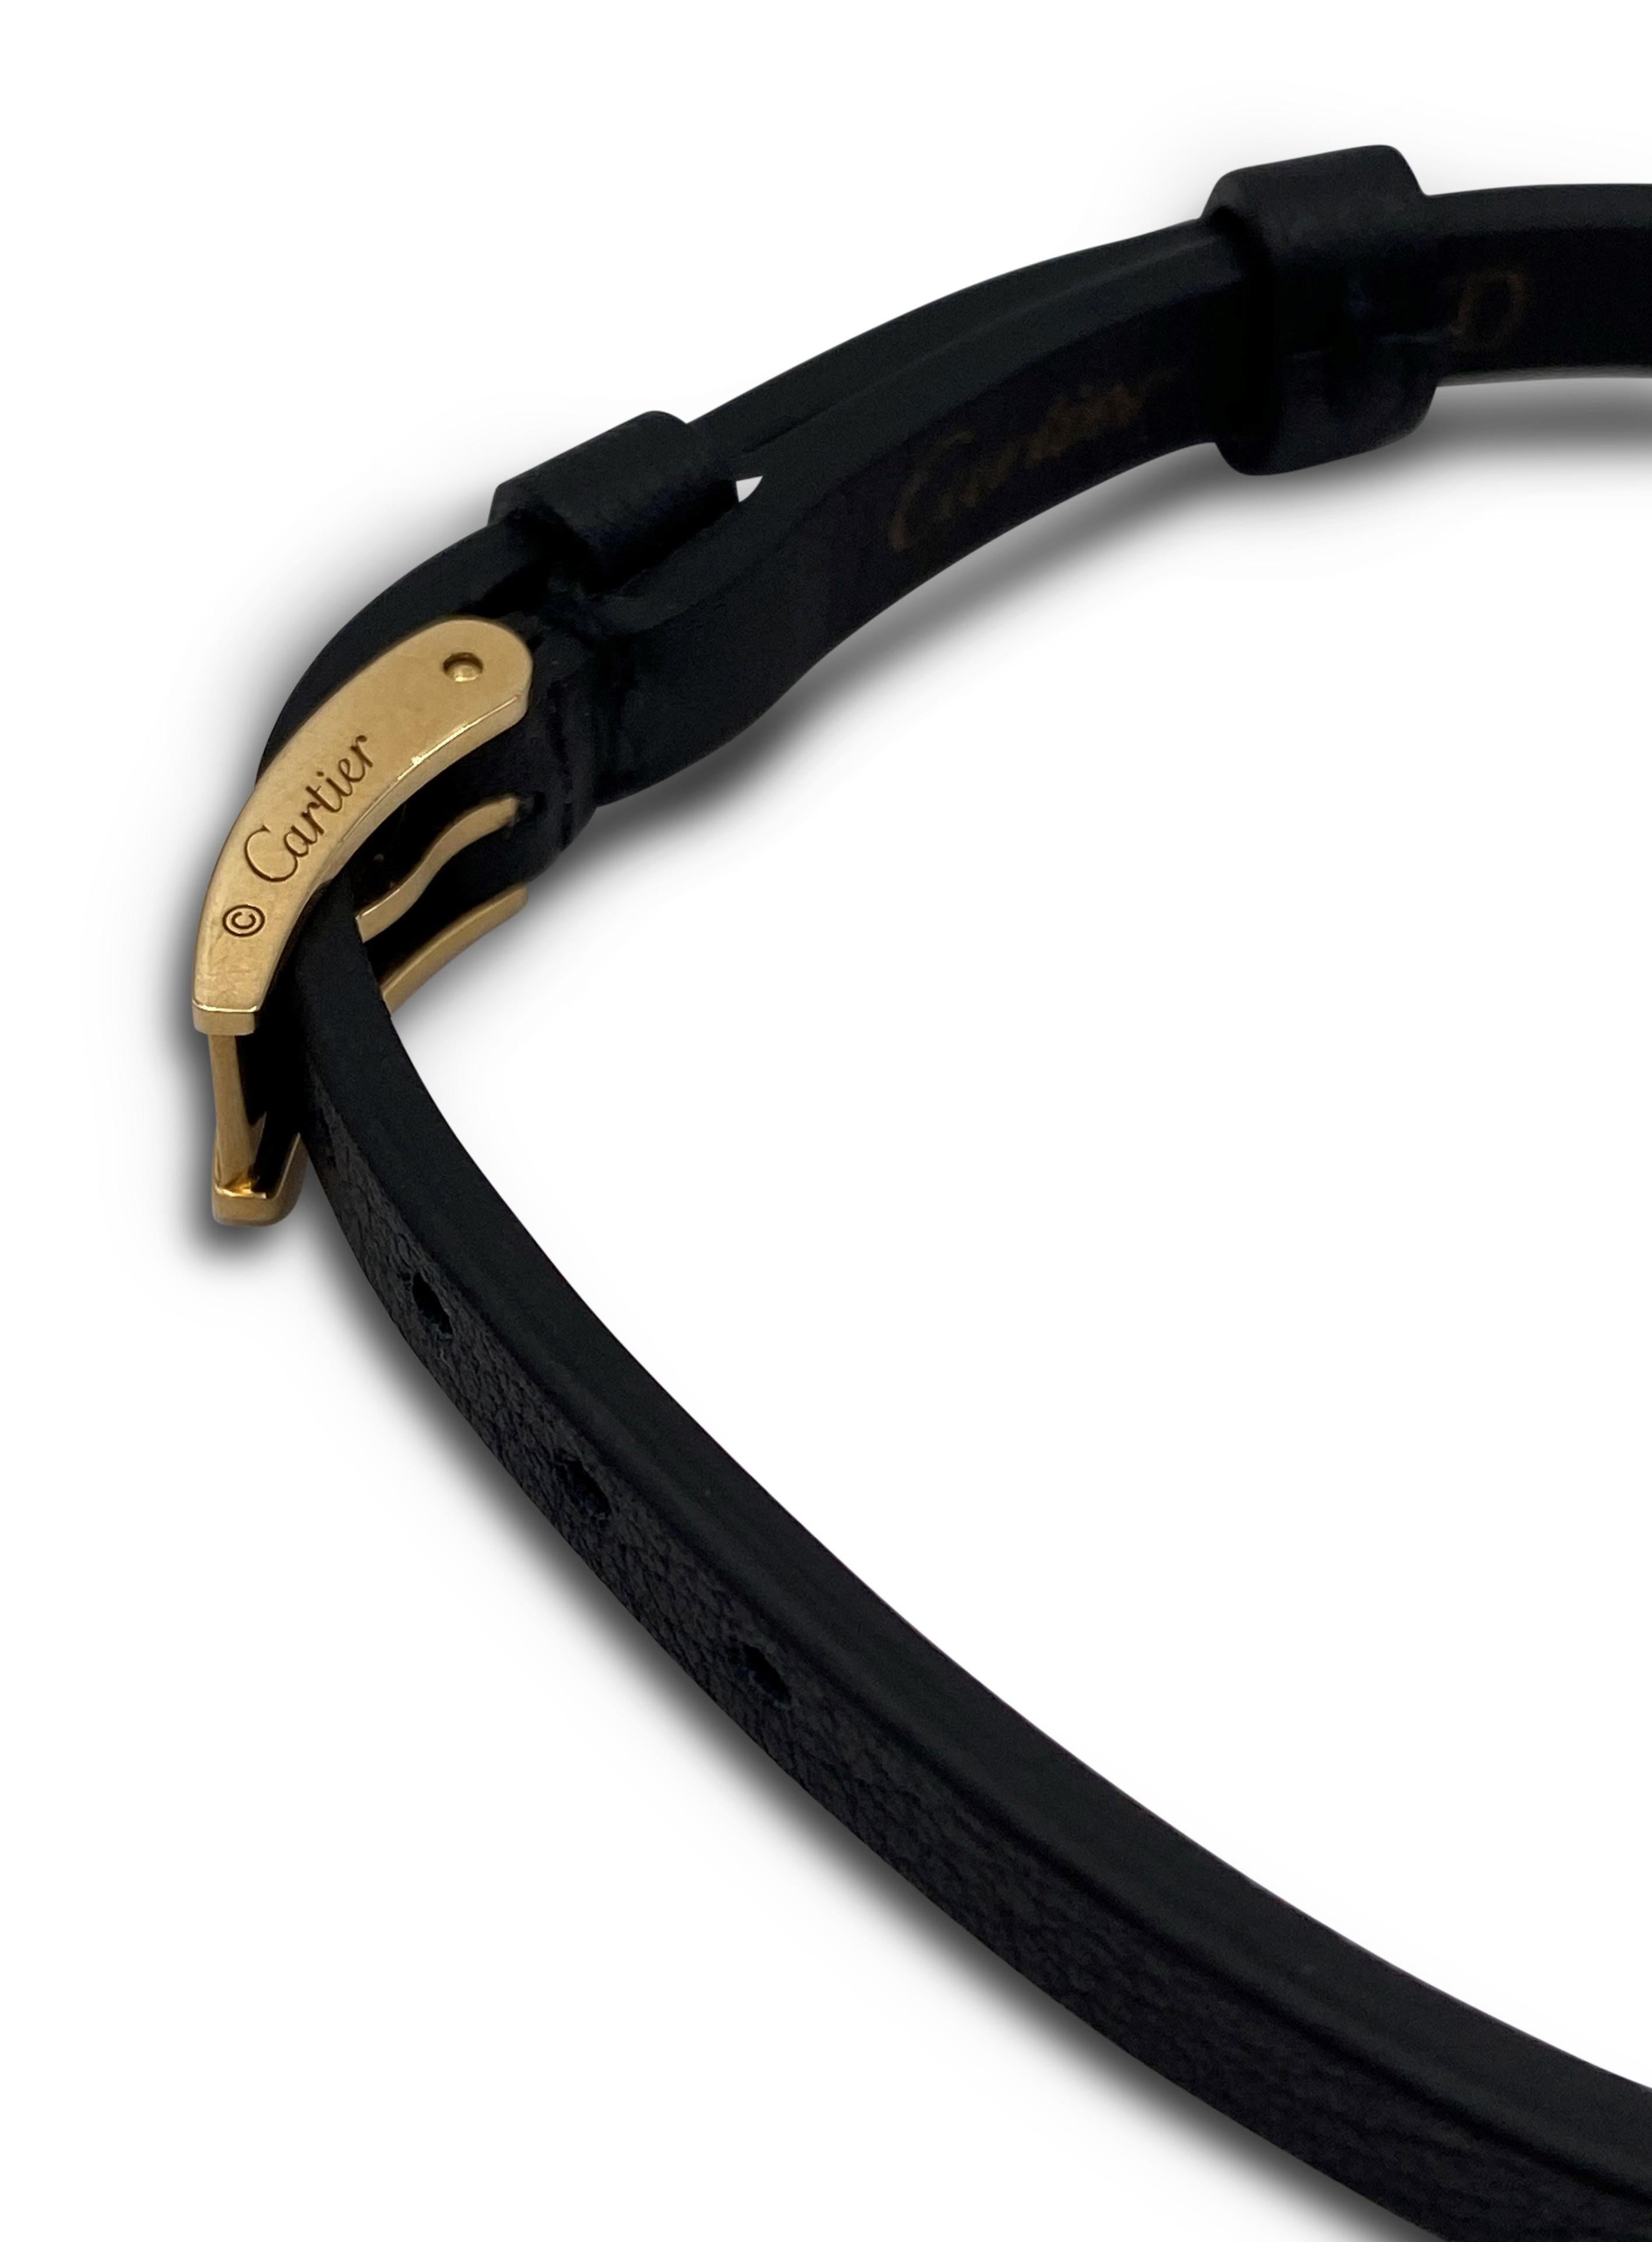 Authentic Cartier 'Love' slide bar bracelet. The bar is crafted in 18 karat yellow gold featuring a long rectangular shape bar with 3 screw motifs which slides on the slim (6mm width) black leather strap with 18 karat yellow gold buckle. Bracelet is